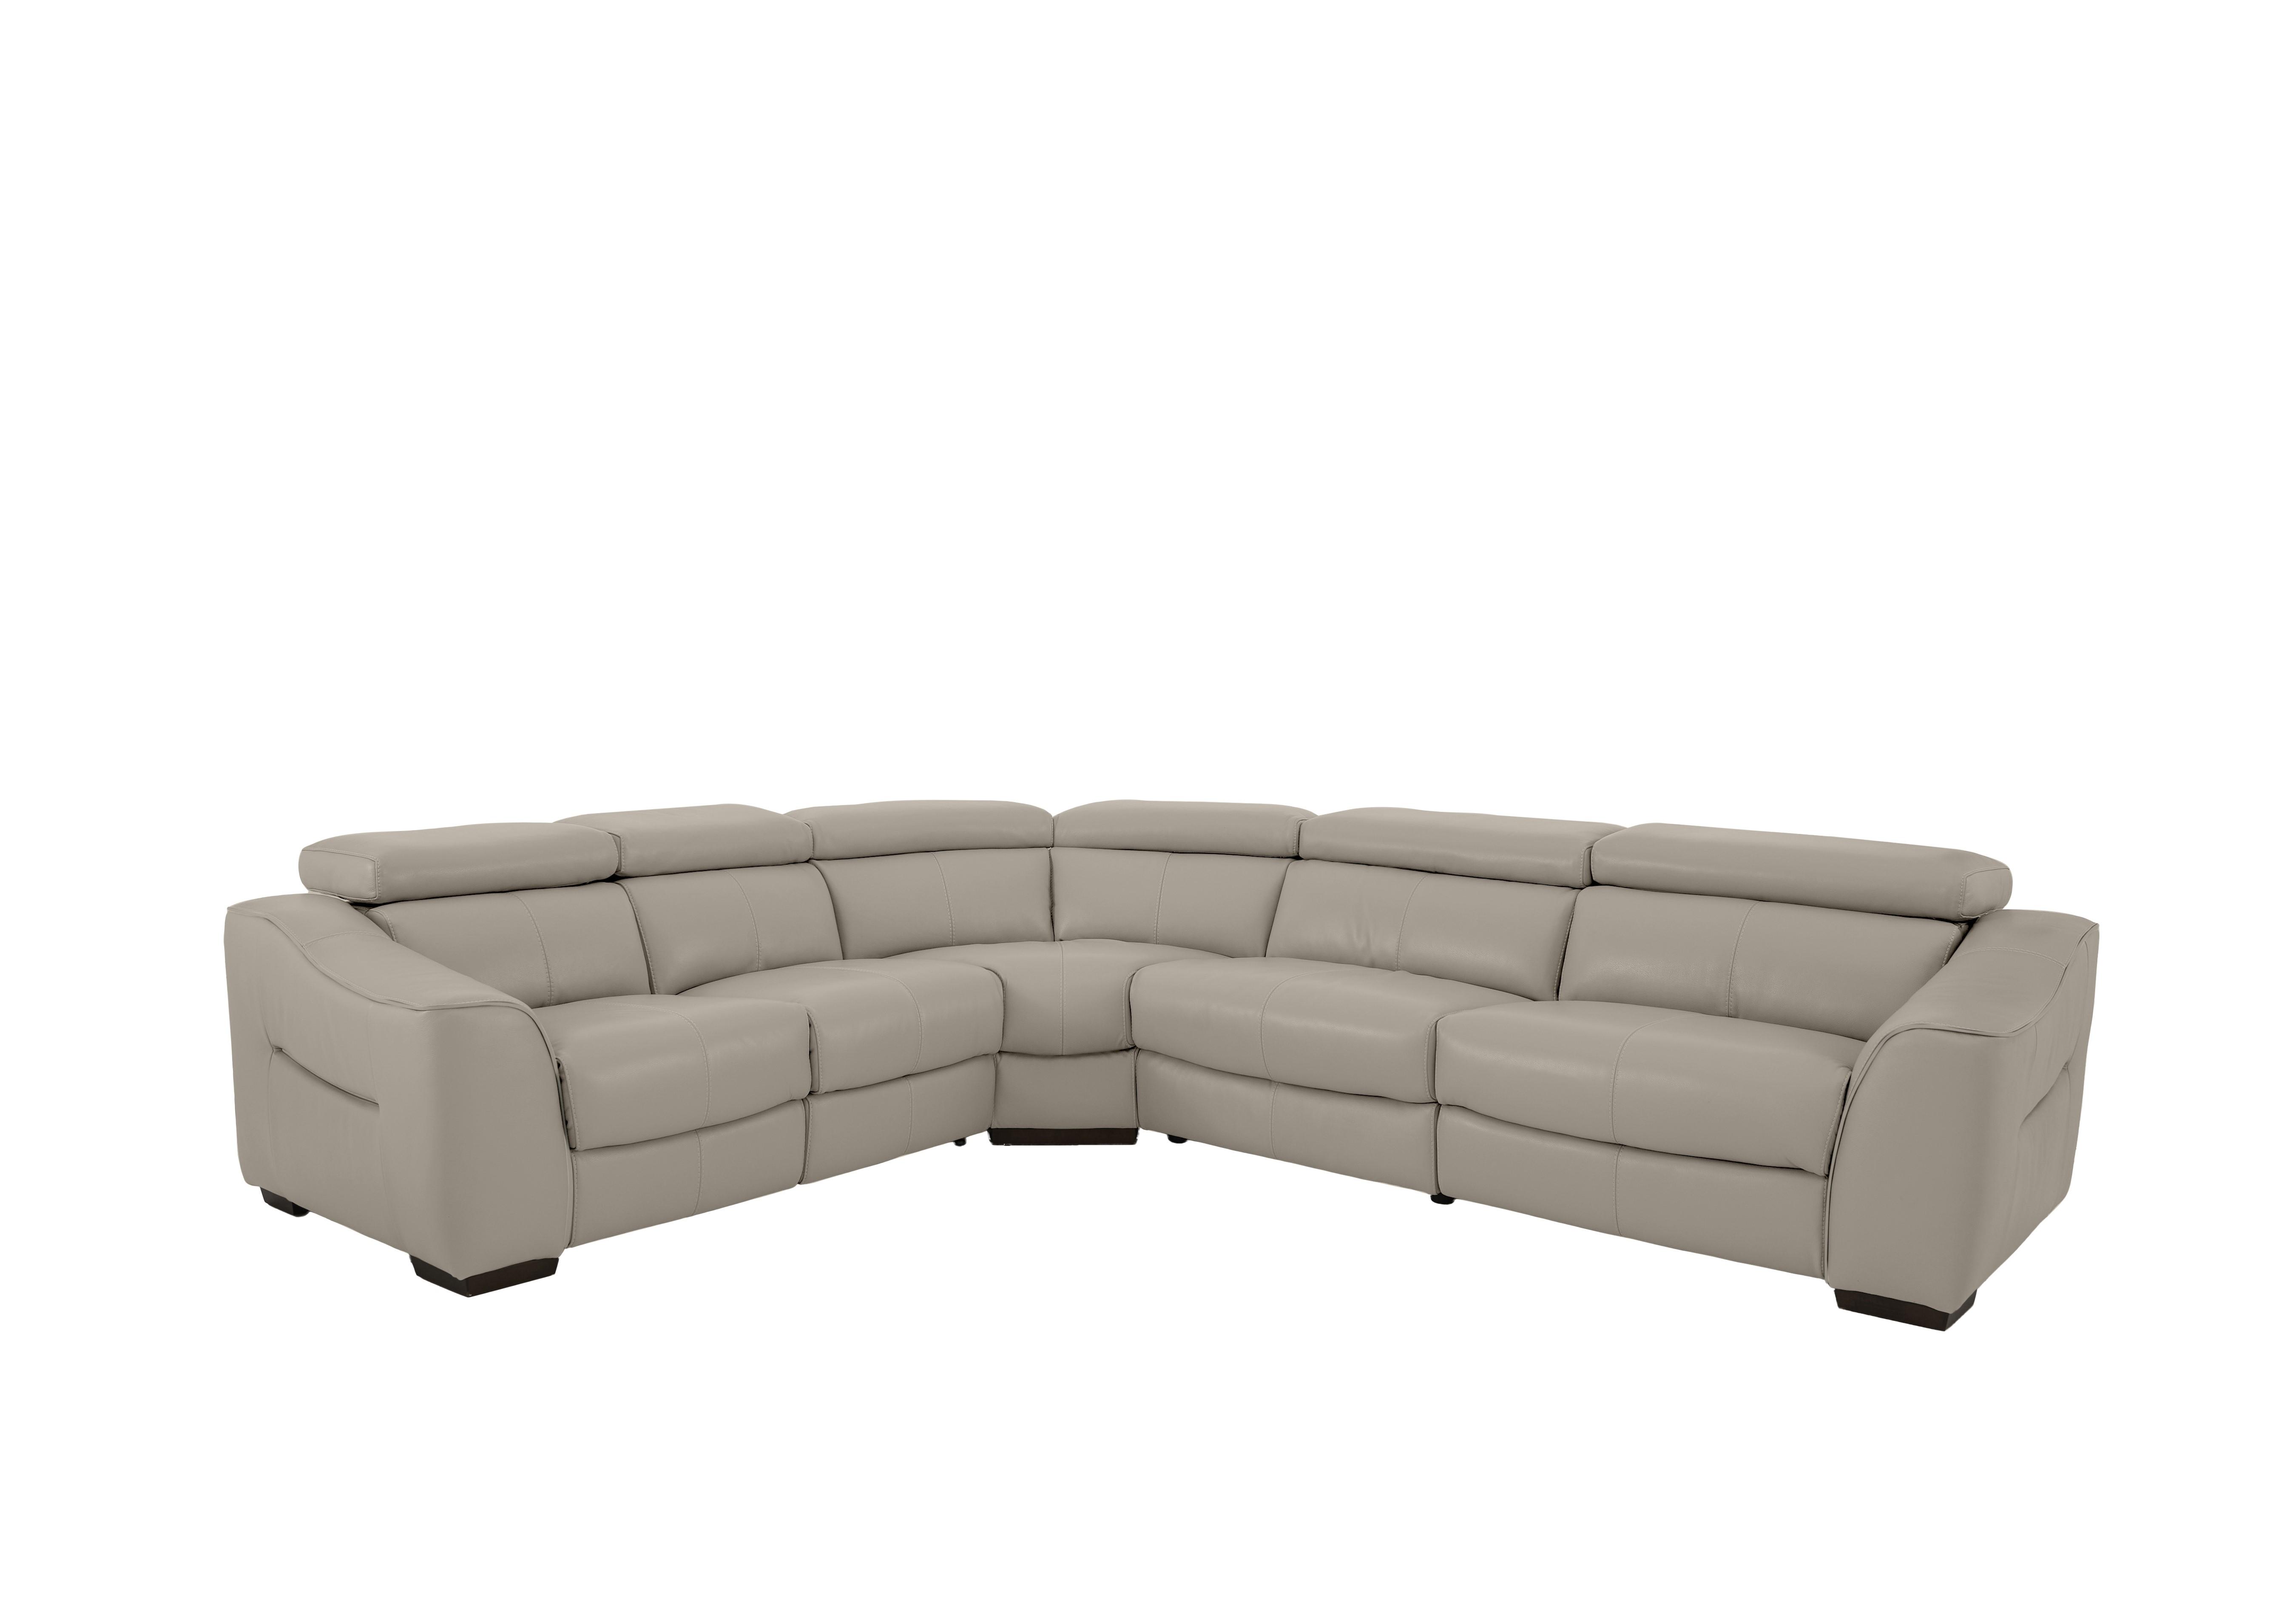 Elixir Leather Power Recliner Corner Sofa in Nc-946b Feather Grey on Furniture Village